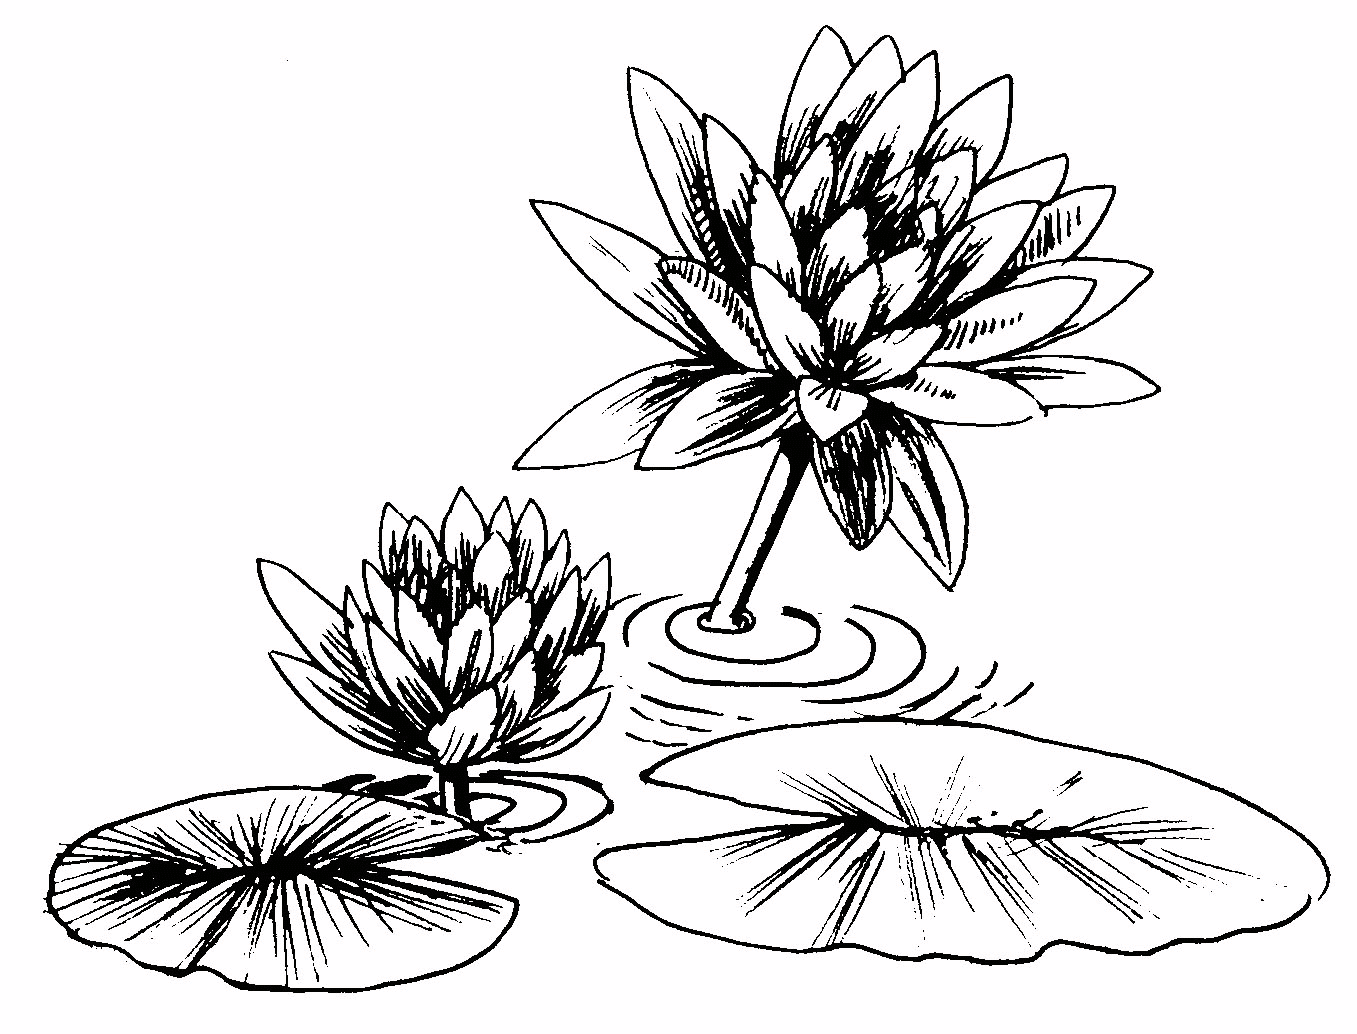 Lily Pad Coloring Page (17 Pictures) - Colorine.net | 27162